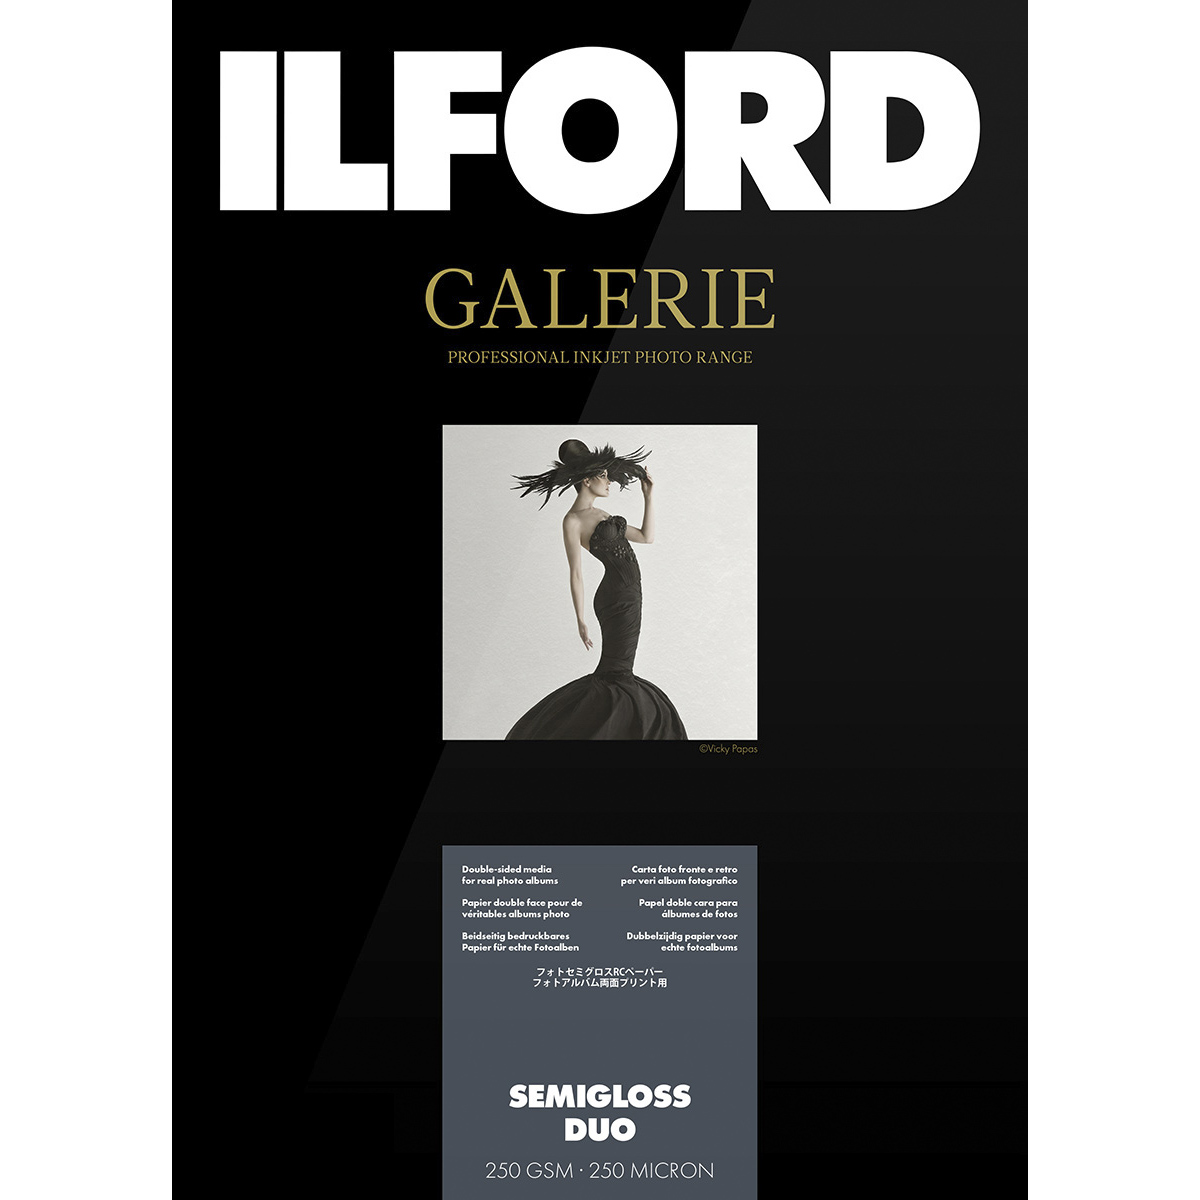 PAPEL ILFORD A3 25H GALERIE SEMIGLOSS DUO 250 GRM ILFORD 